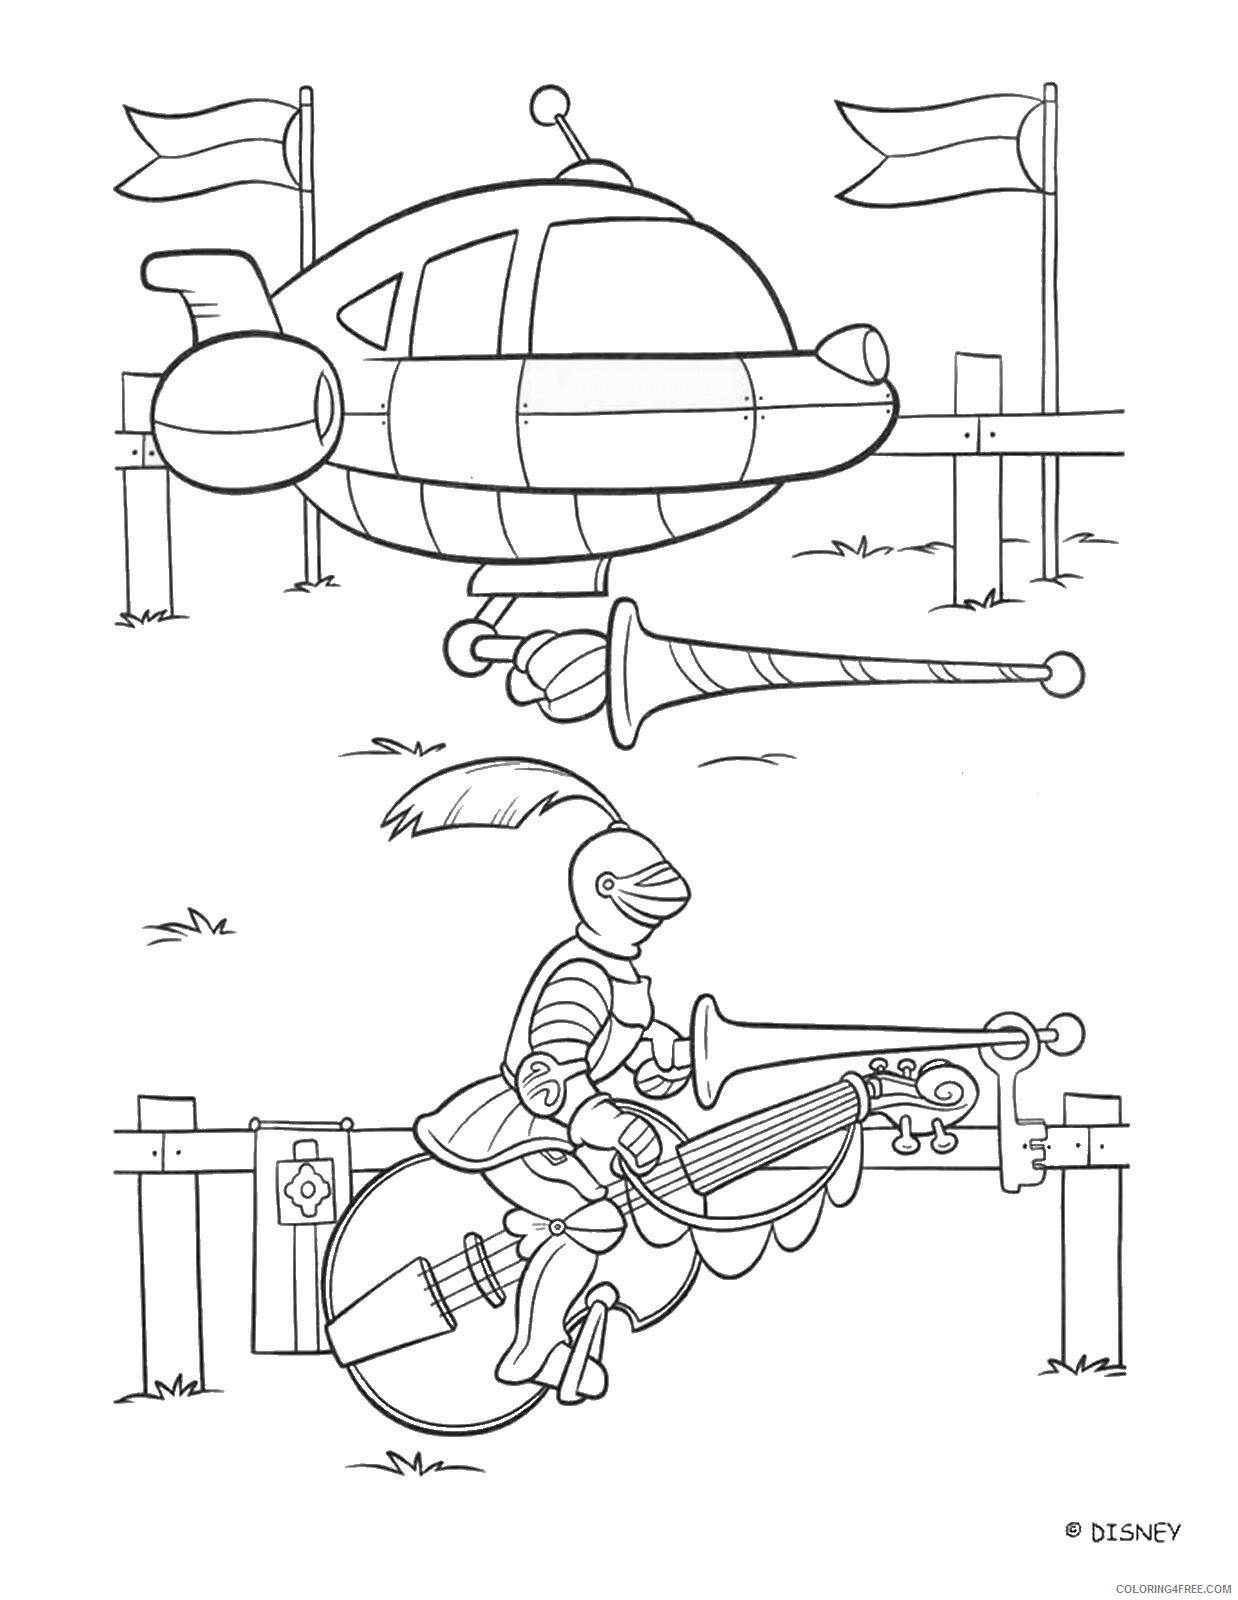 Little Einsteins Coloring Pages TV Film little_einsteins_44 Printable 2020 04508 Coloring4free